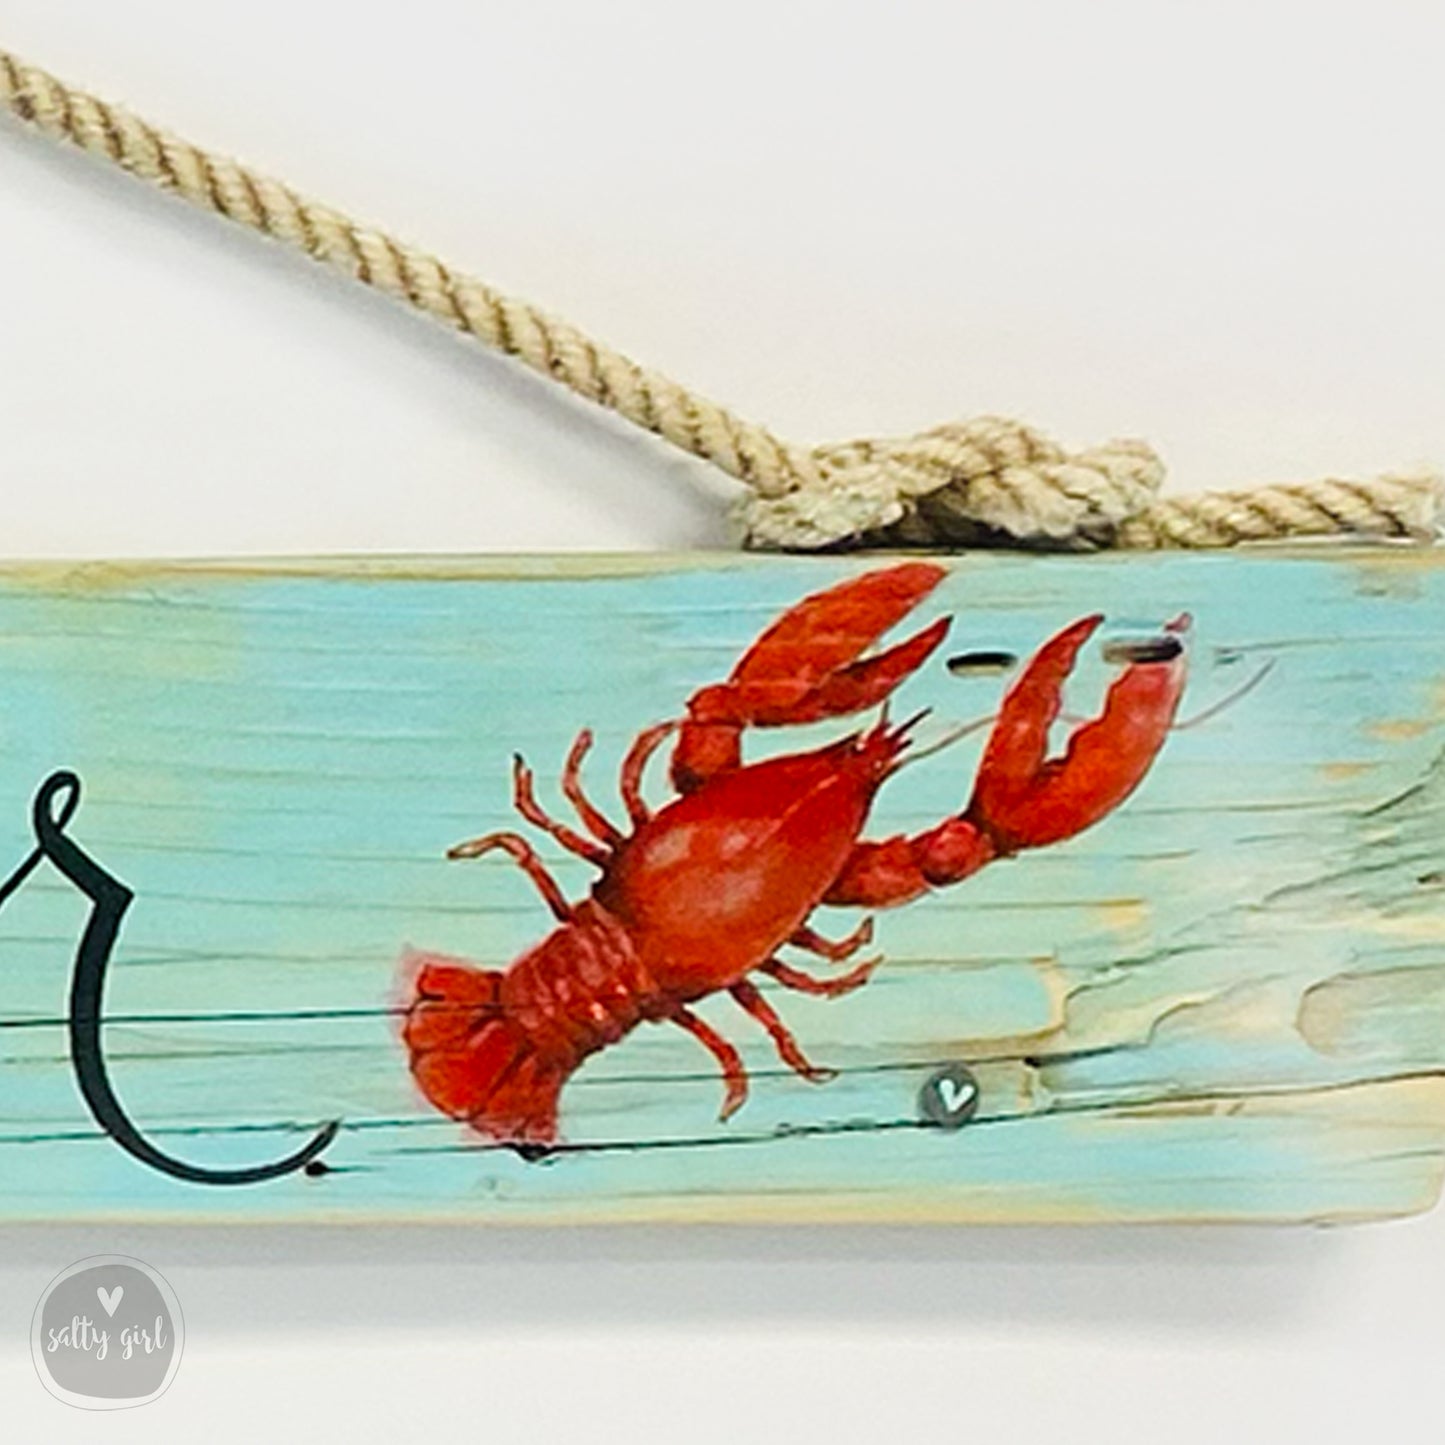 Custom Driftwood Sign with Graphics - Personalized Sign with Fishing Rope Hanger - Hand Painted Wooden Sign - Coastal Decor